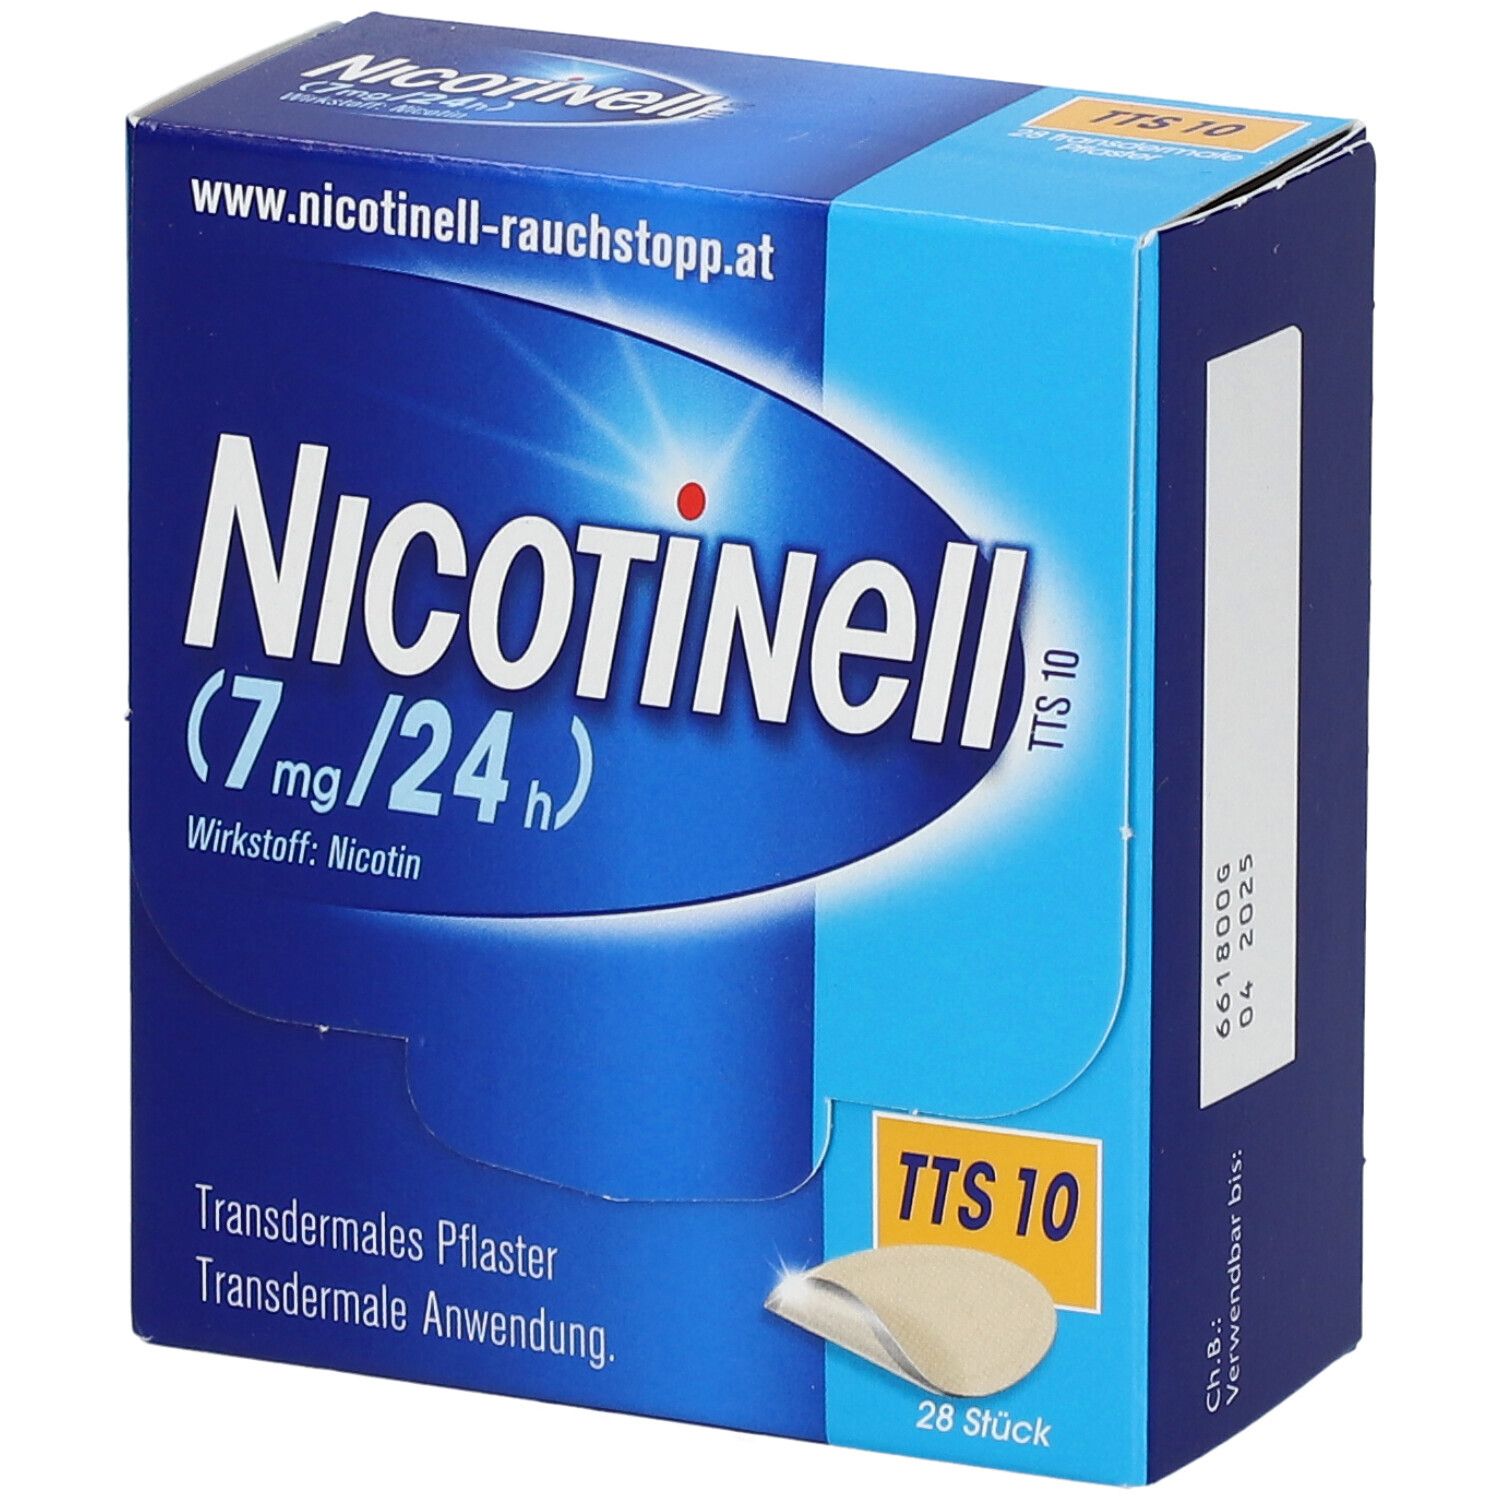 NICOTINELL® Transdermales Pflaster TTS 10